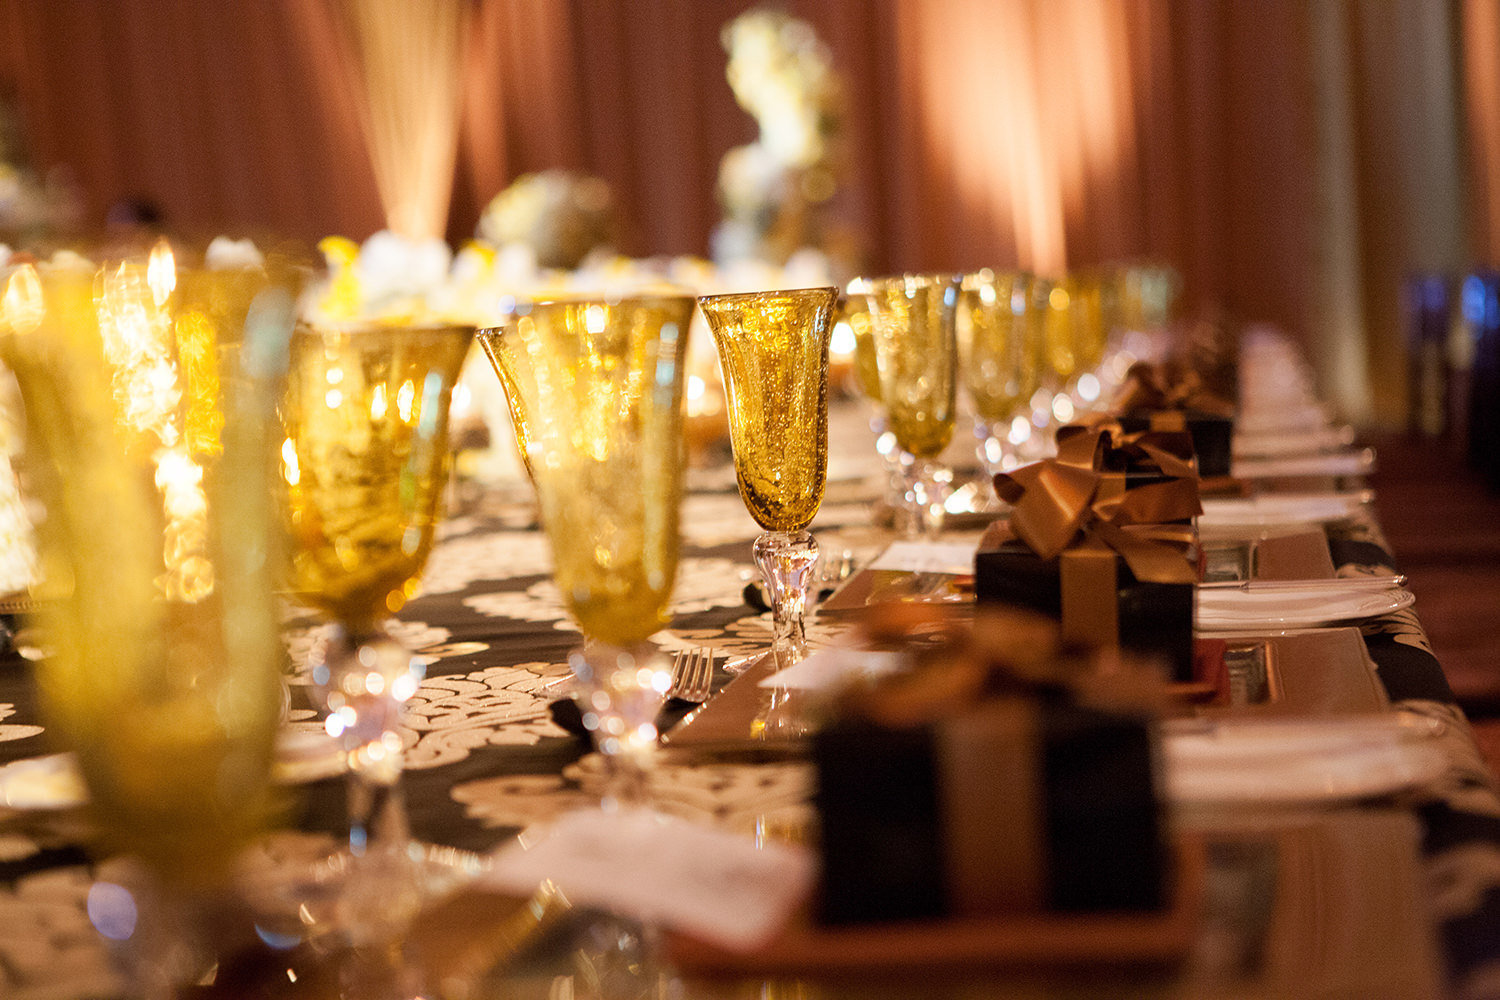 Wedding reception tables set perfectly for the nights celebration